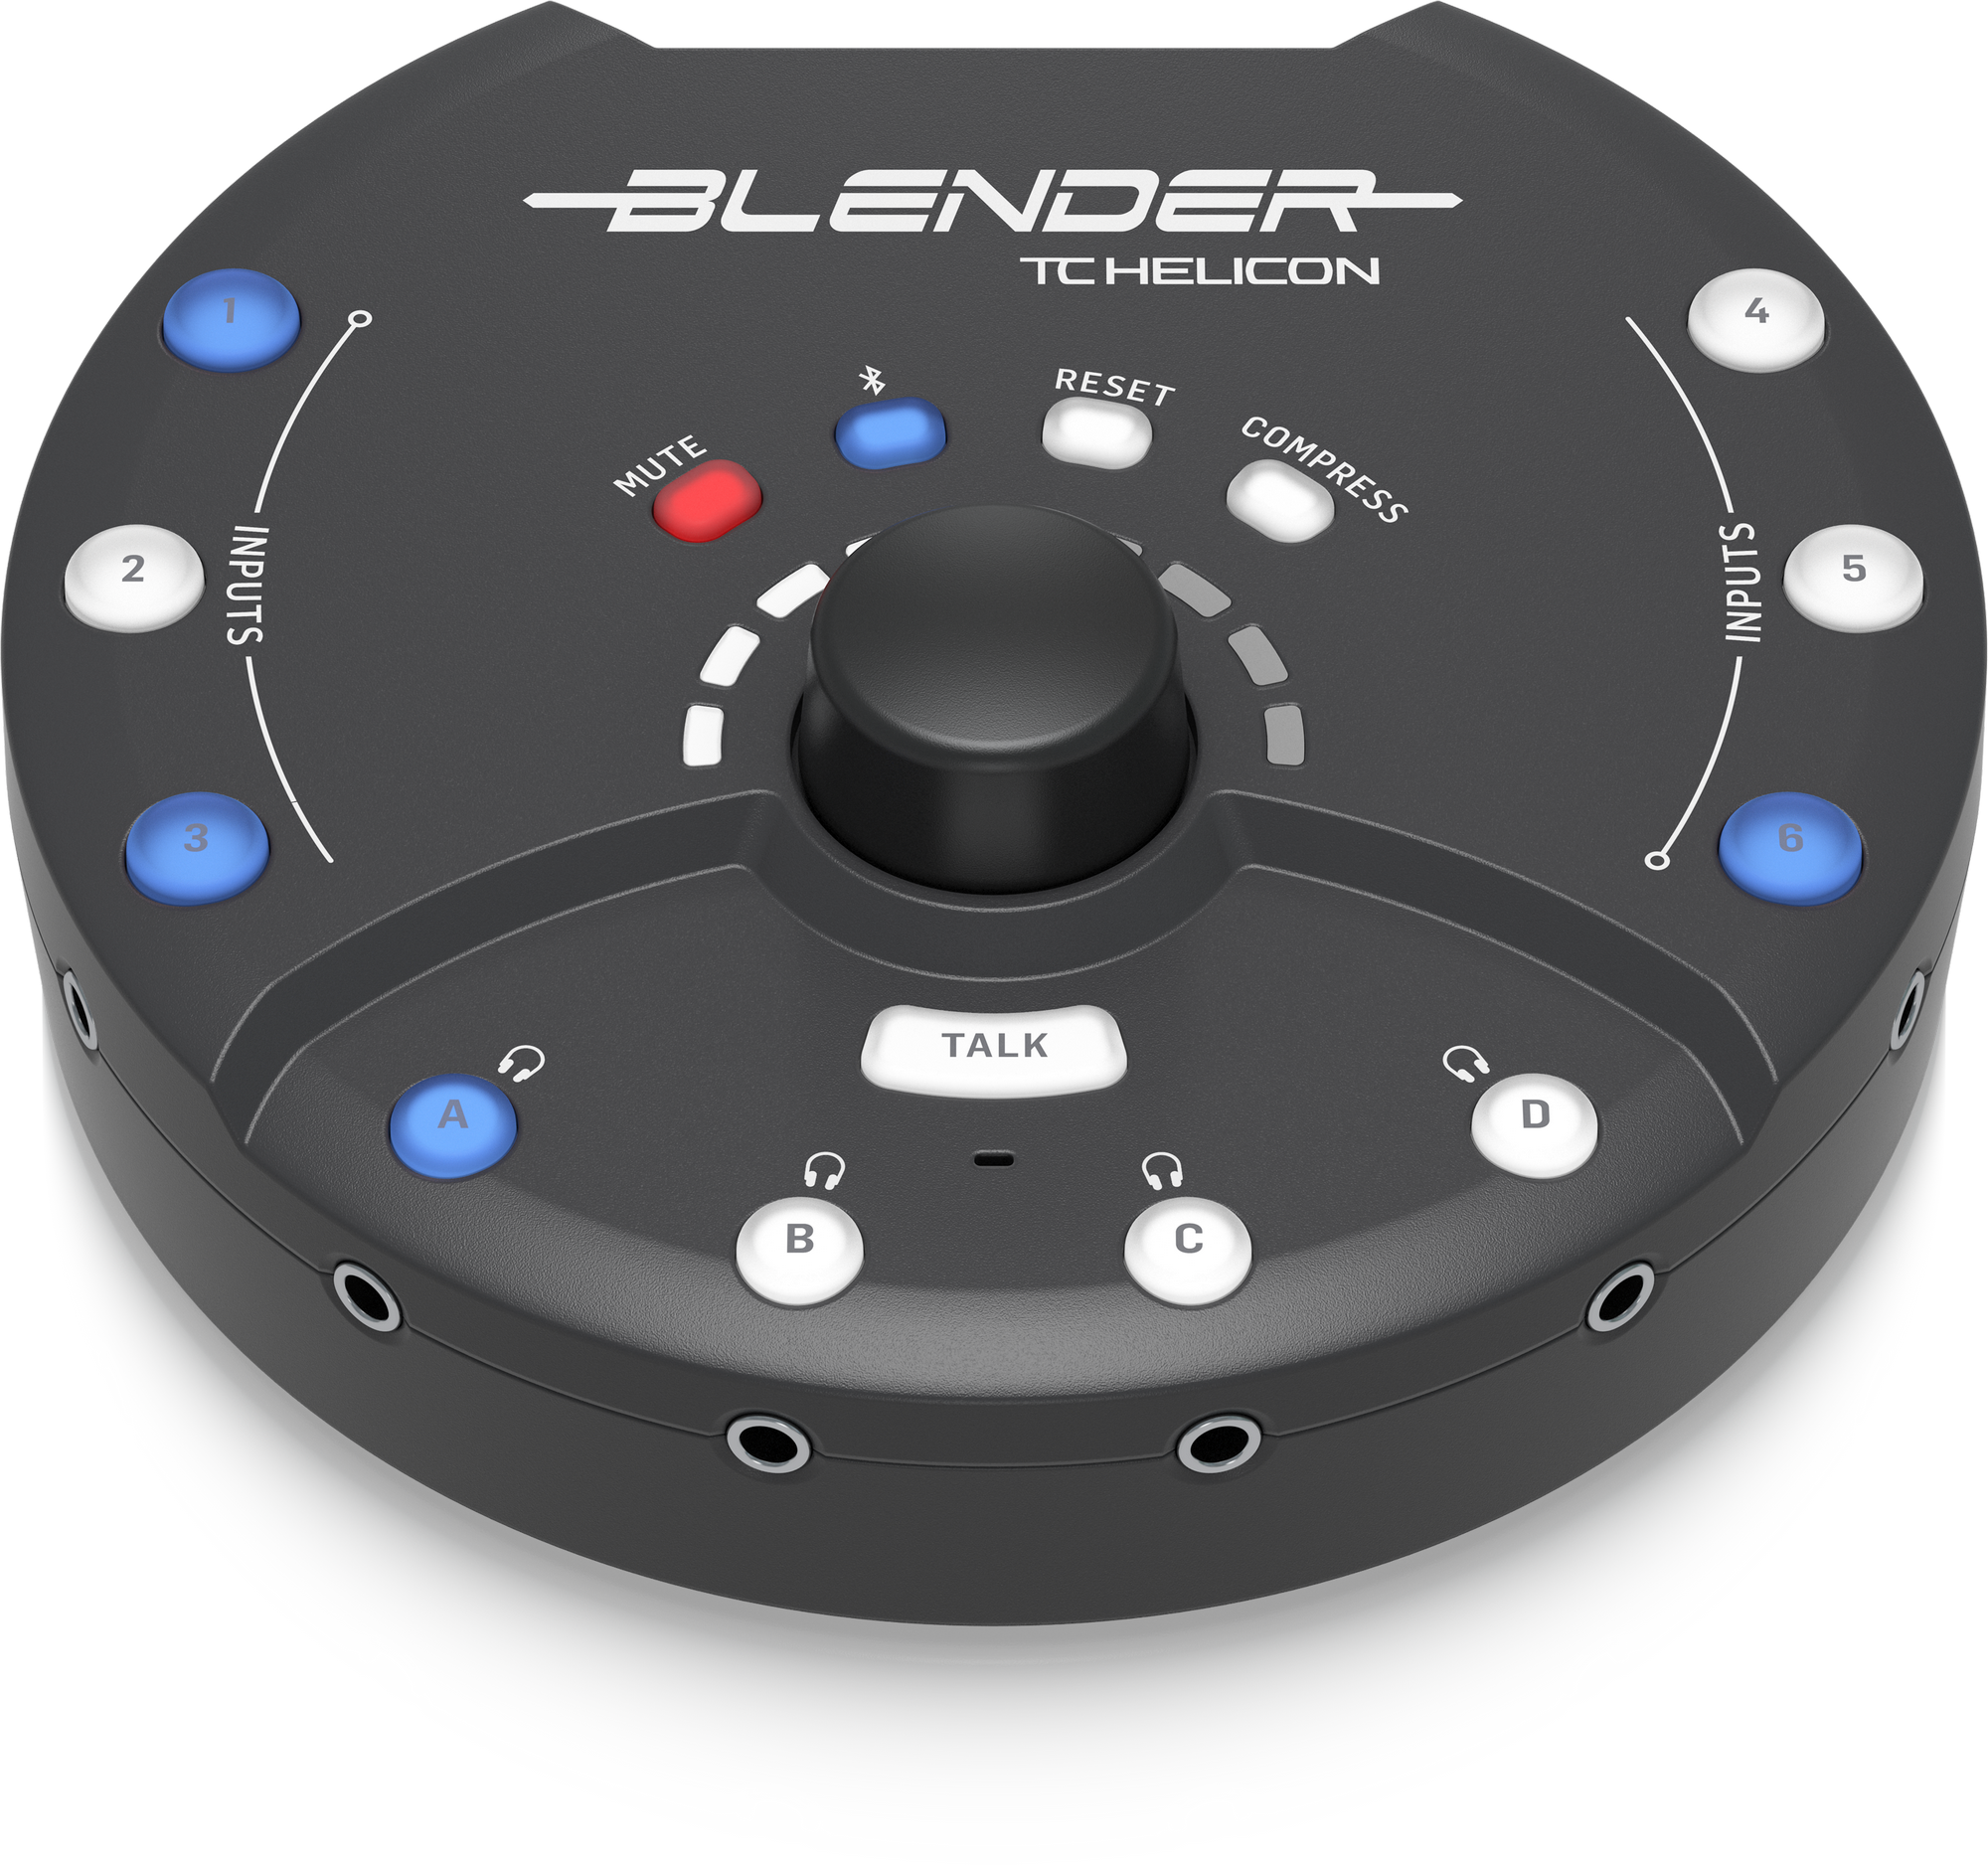 TC HELICON BLENDER PORTABLE 12 X 8 STEREO MIXER WITH 12 X 2 USB AUDIO INTERFACE AND REMOTE CONTROL, TC HELICON, MIXER, tc-helicon-mixer-blender, ZOSO MUSIC SDN BHD